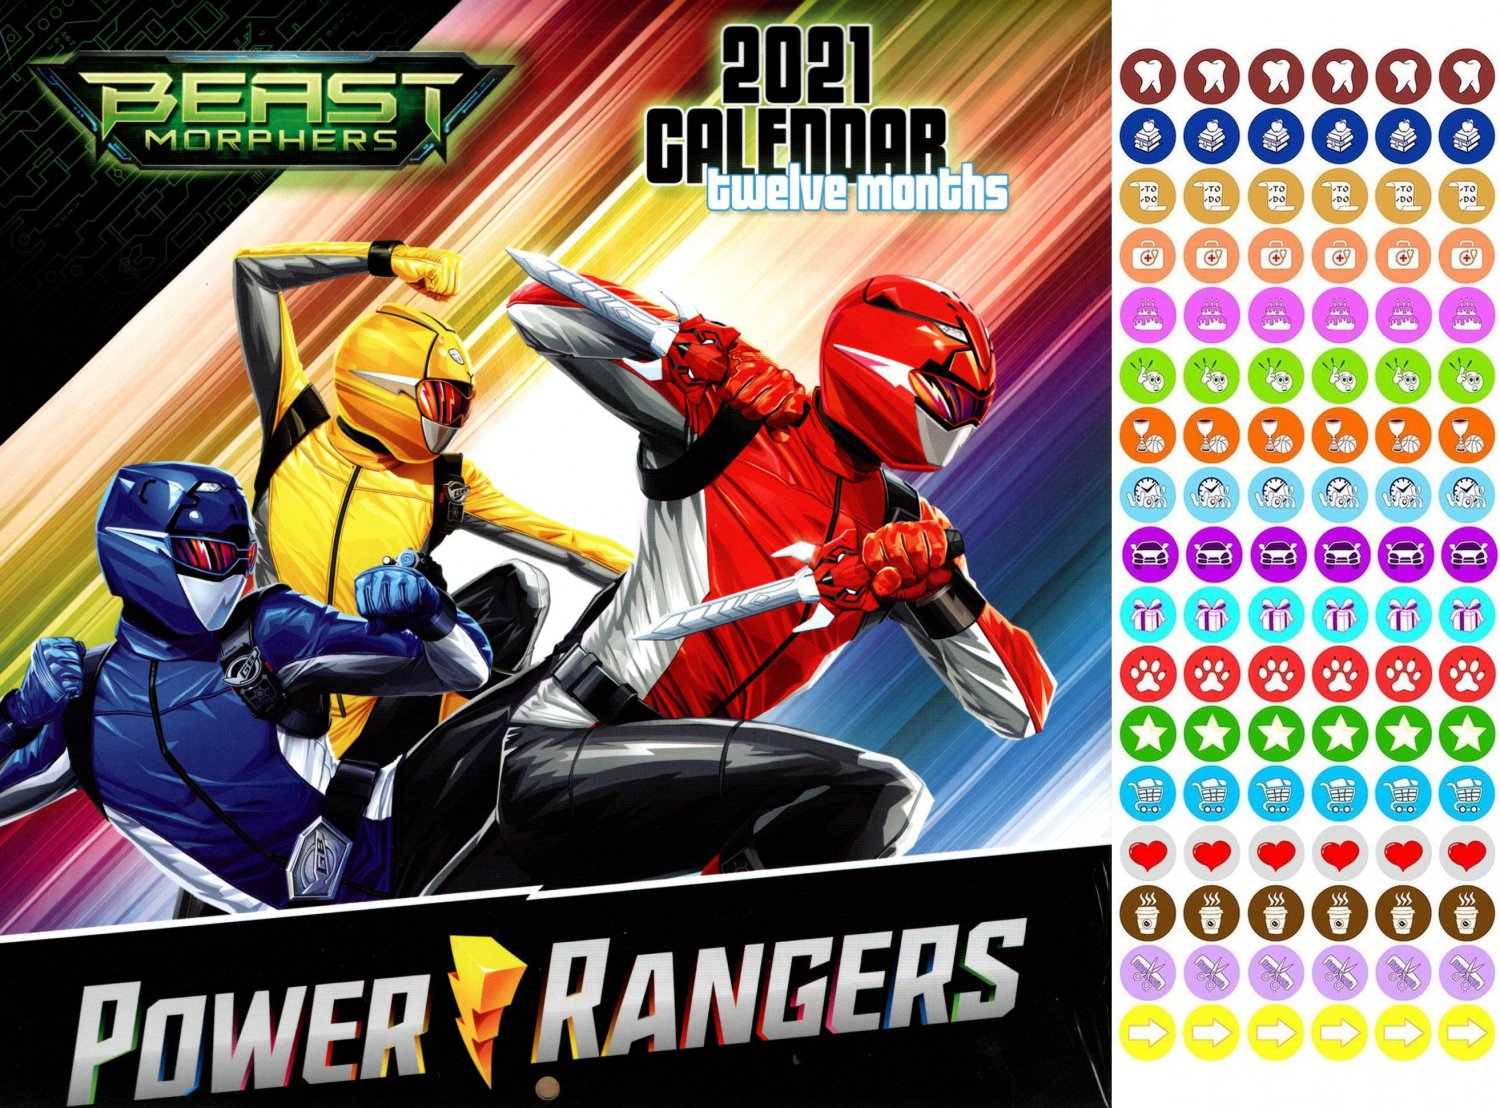 power-rangers-12-month-2021-wall-calendar-with-100-reminder-stickers